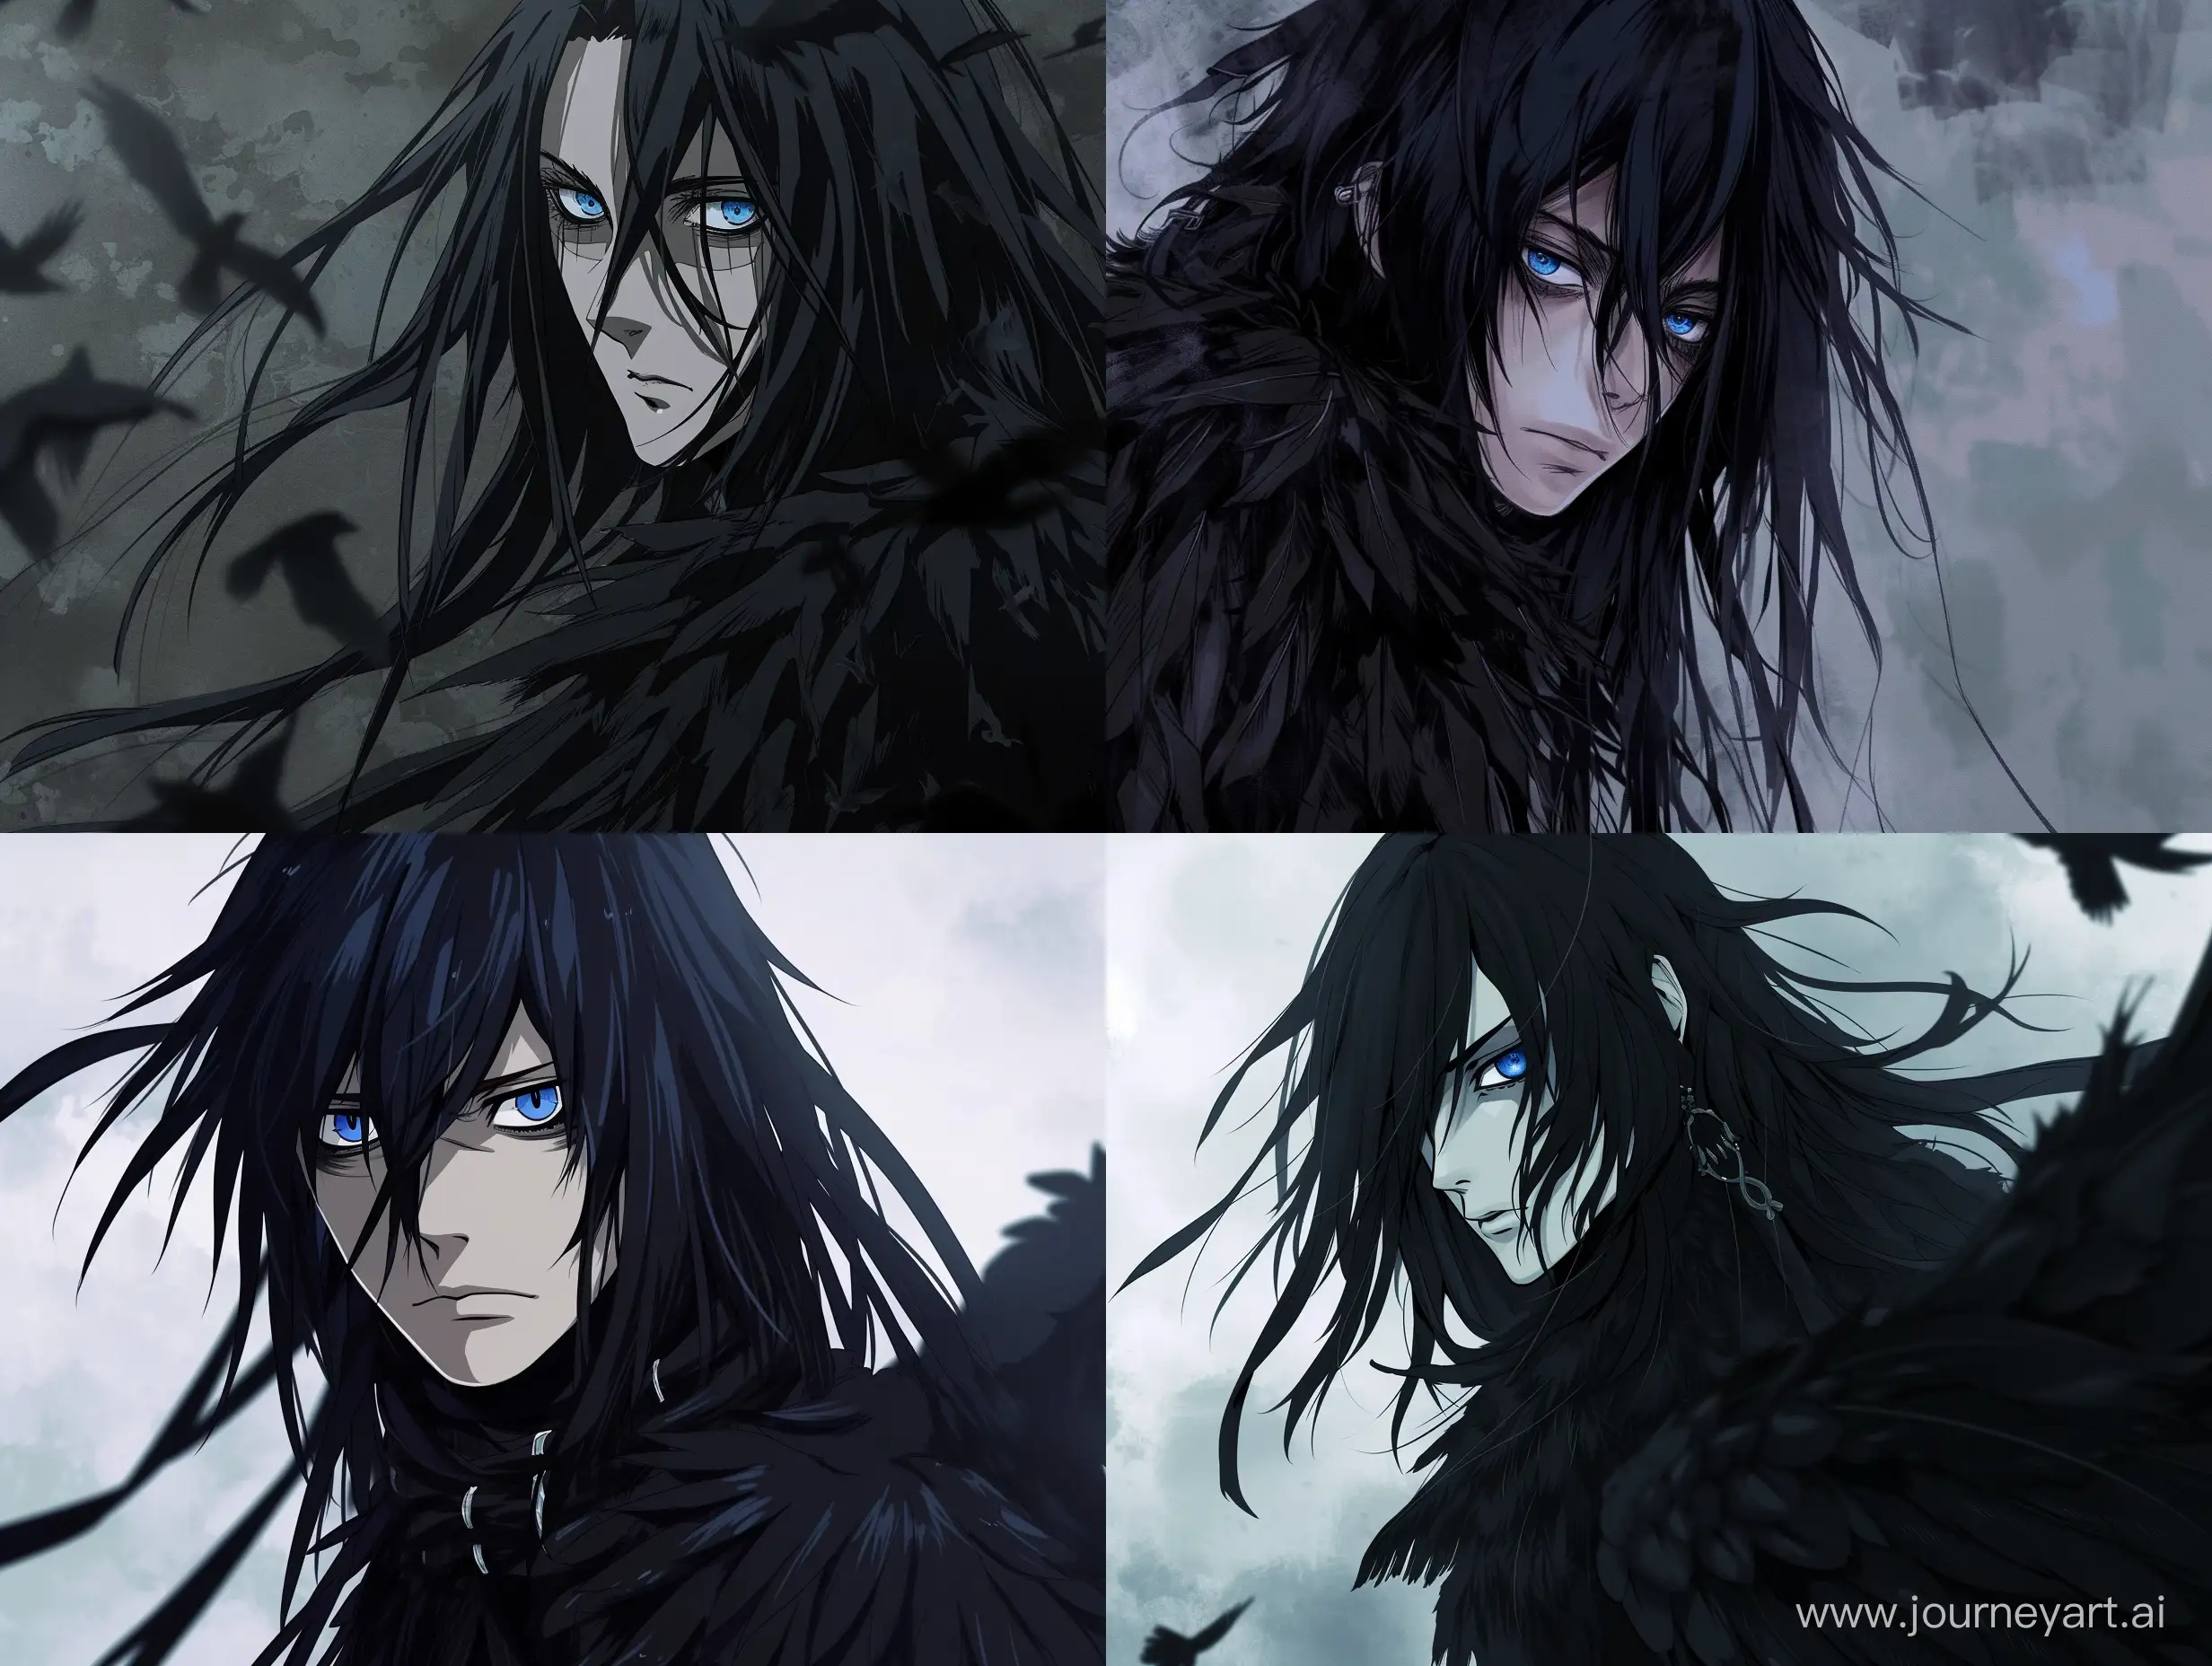 Gothic-Anime-Character-Brooding-Raven-with-Long-Black-Hair-and-Piercing-Blue-Eyes